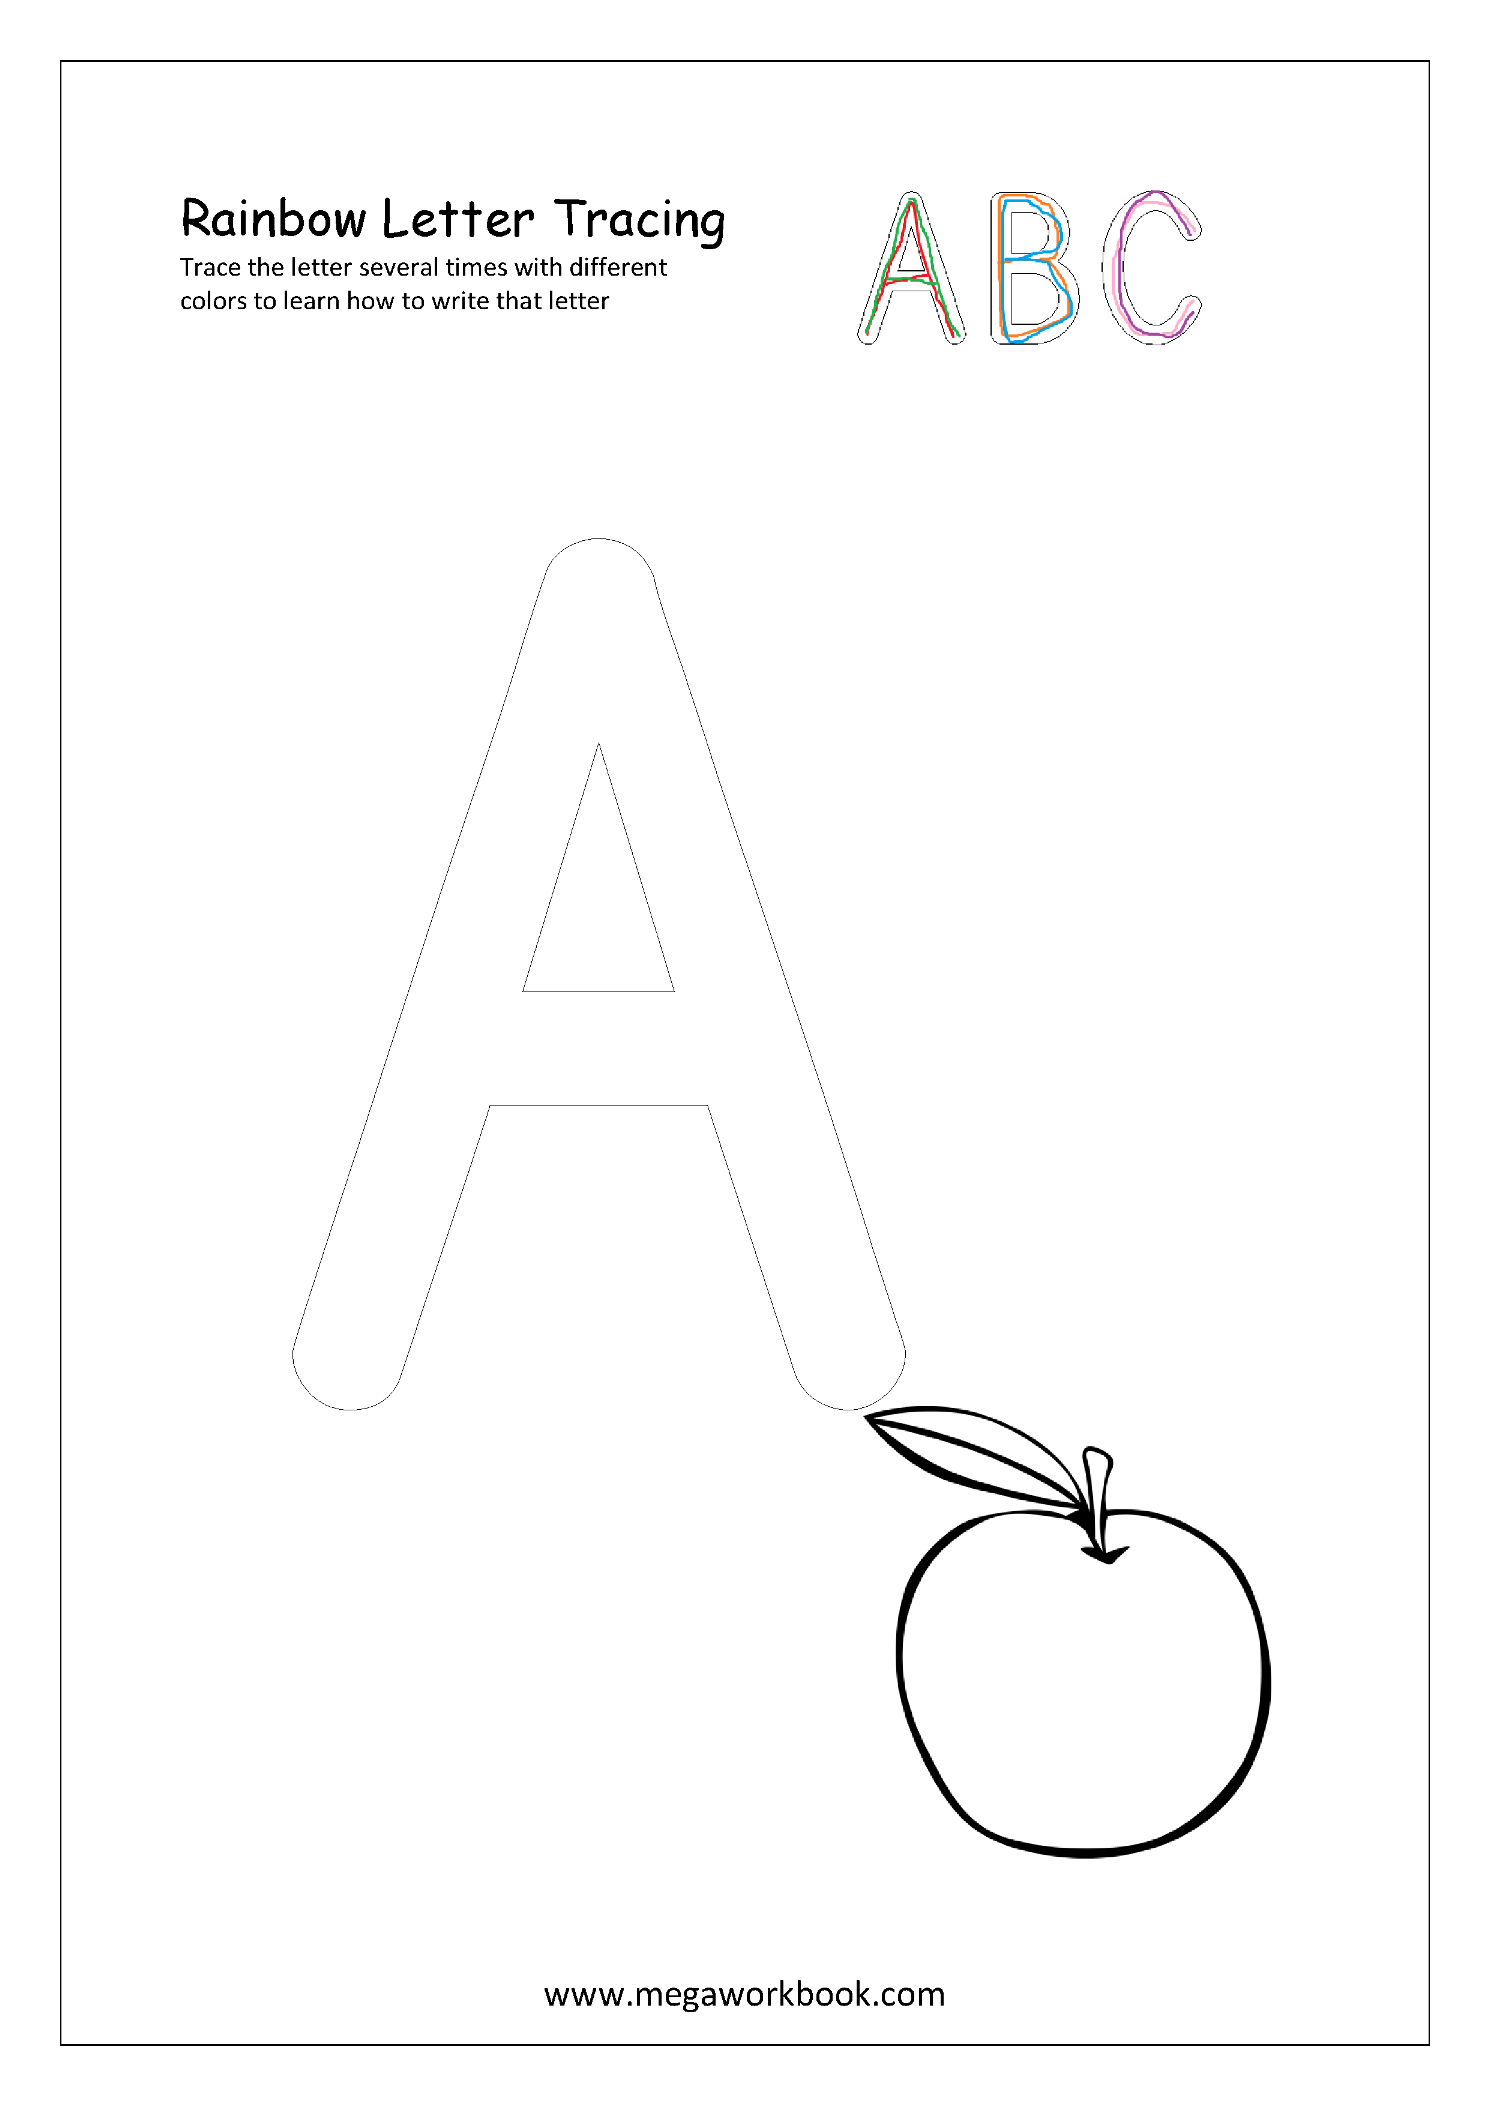 Free Printable Rainbow Writing Worksheets - Rainbow Letter within Rainbow Tracing Letters